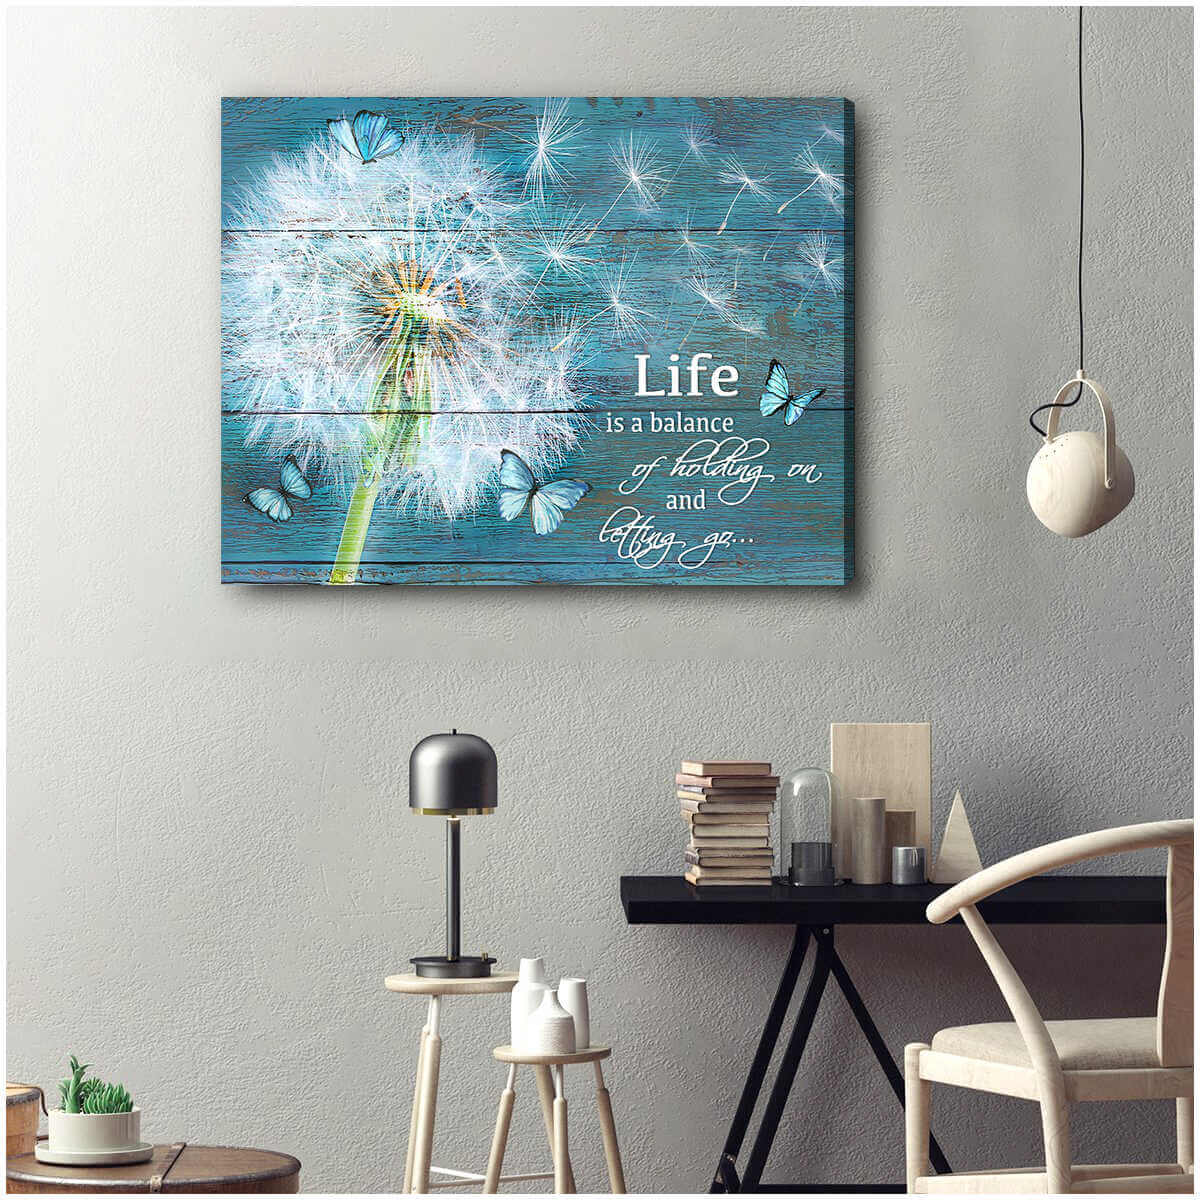 Dandelion Life Is A Balance Of Holding On And Letting Go Canvas Prints Wall Art Decor